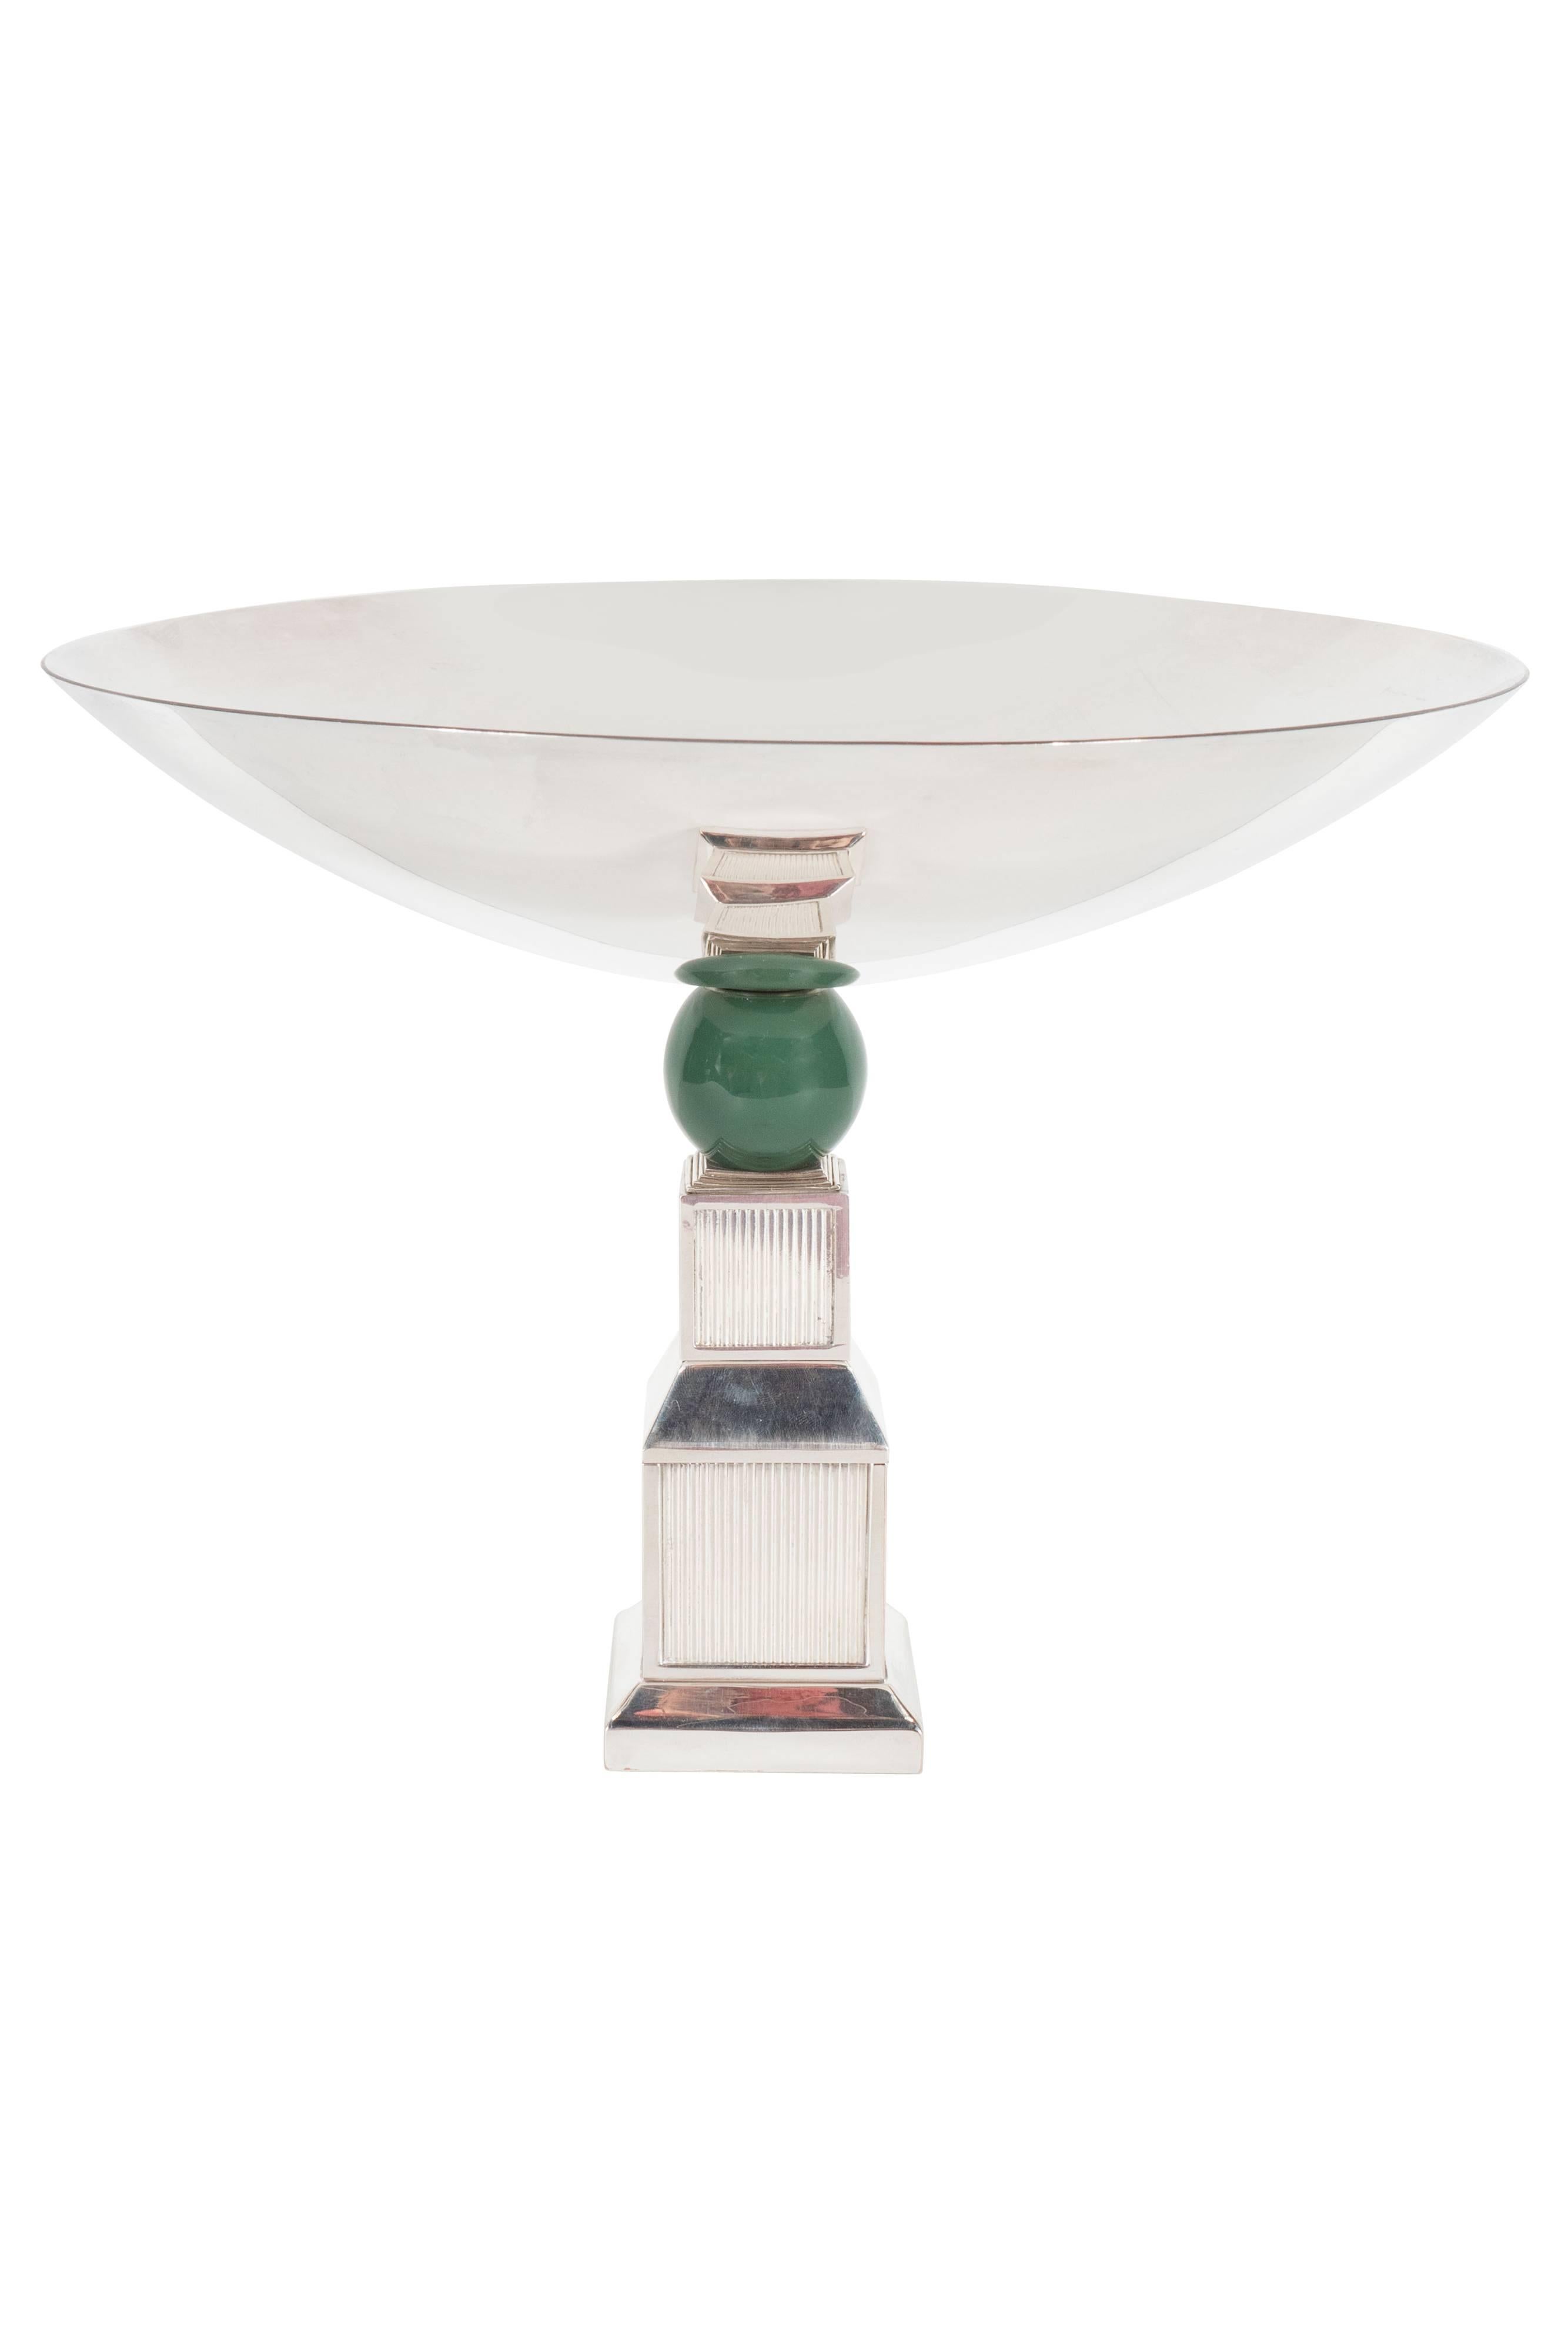 Late 20th Century Mid-Century Modernist Art Deco Style Silver-Plated Bronze Tazza by Gucci